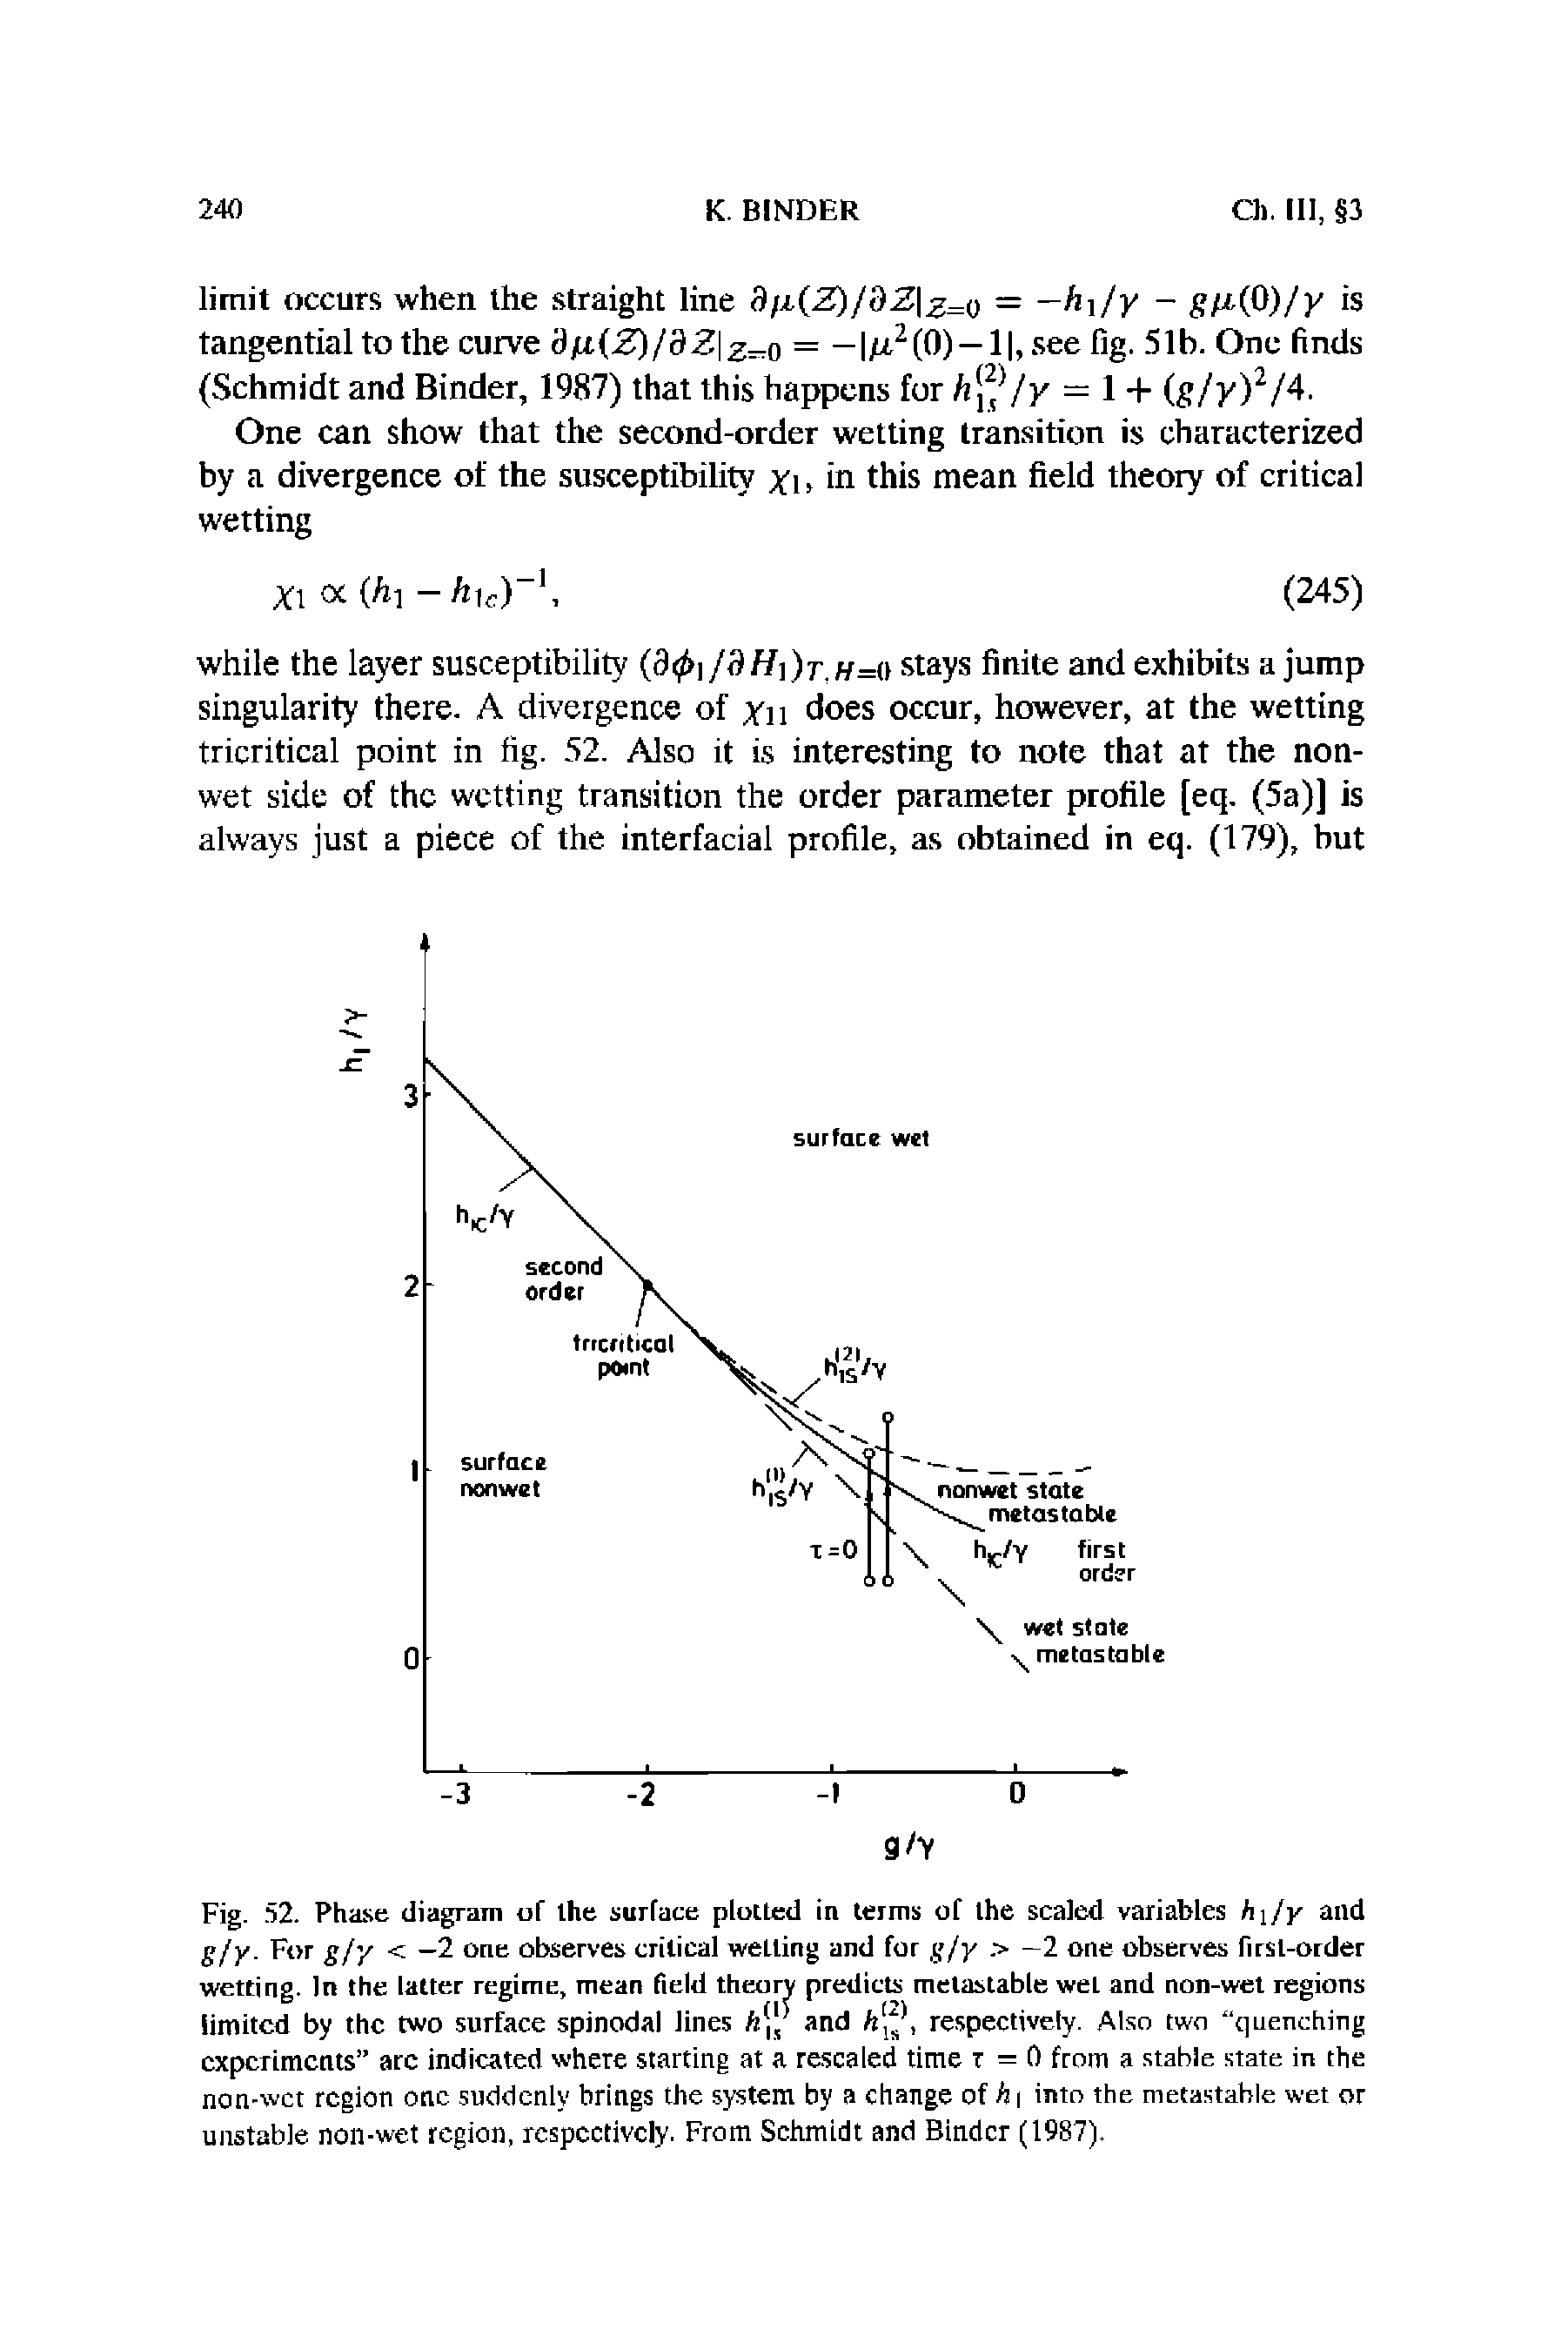 Fig. 32. Phase diagram of the surface plotted in terms of the scaled variables h jy and g/y. For g/y < —2 one observes critical wetting and for g/y > —2 one observes first-order wetting. In the latter regime, mean field theory predicts melaslable wet and non-wet regions limited by the two surface spinodal lines ft, and ft( respectively. Also two quenching experiments arc indicated where starting at a rescaled time r = 0 from a stable state in the non-wet region one suddenly brings the system by a change of fti into the metastahle wet or unstable non-wet region, respectively. From Schmidt and Binder (1987).